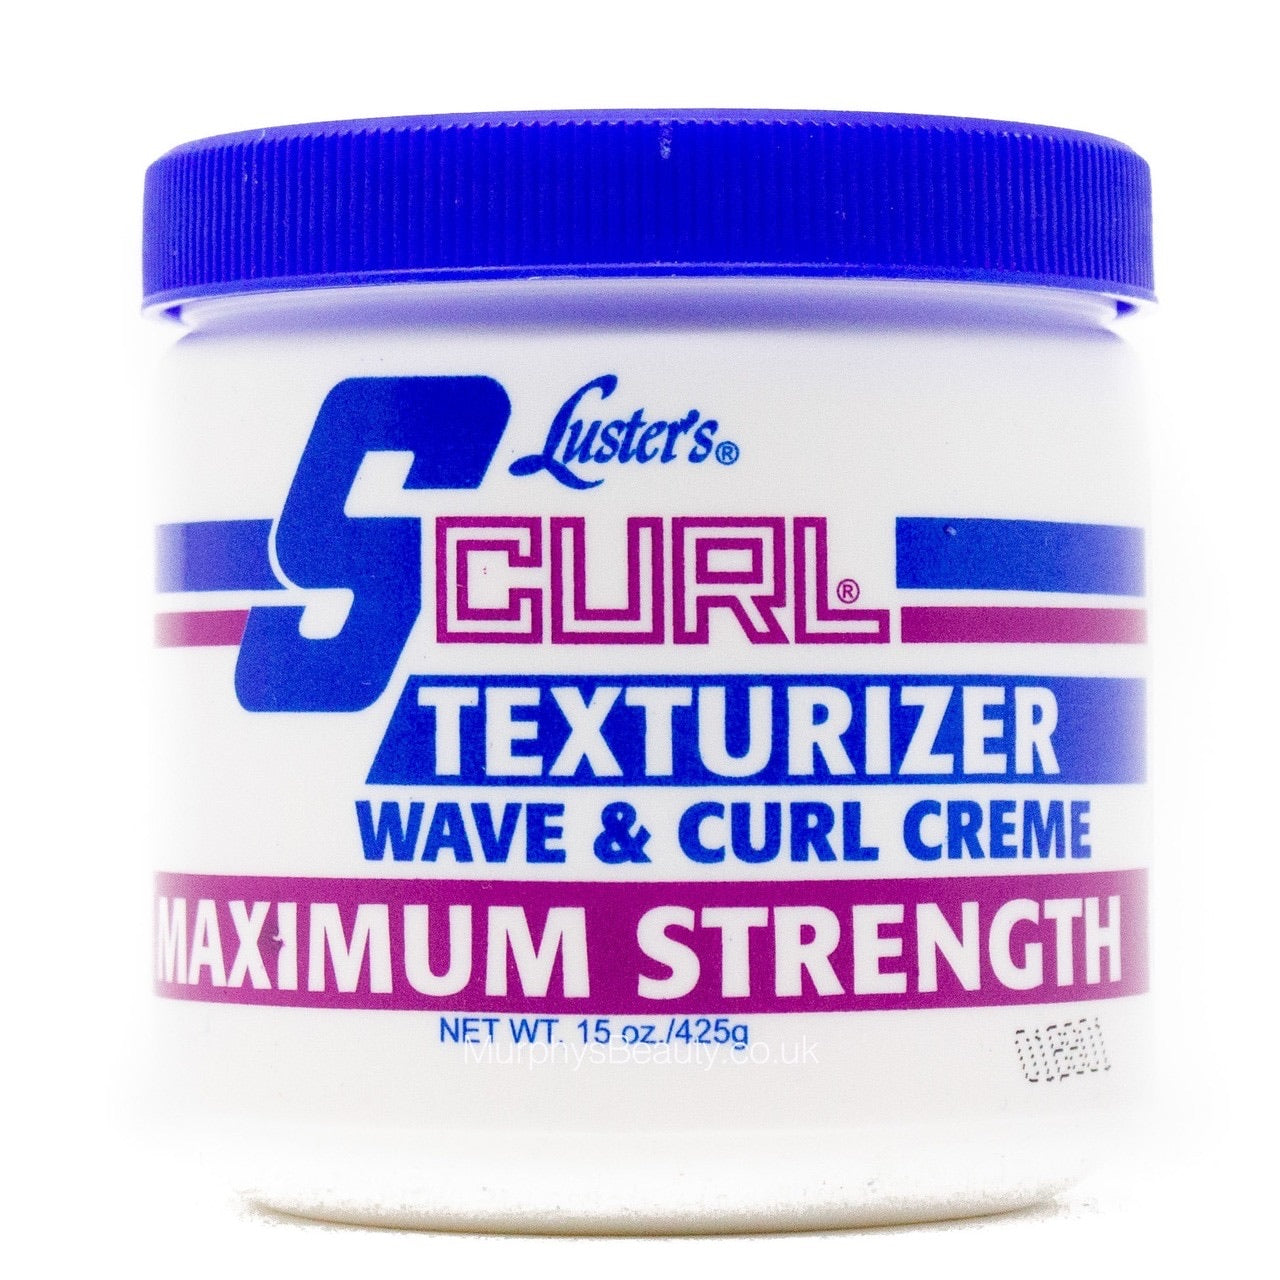 Luster’s Scurl texturizer wave & curl creme max strength 15oz